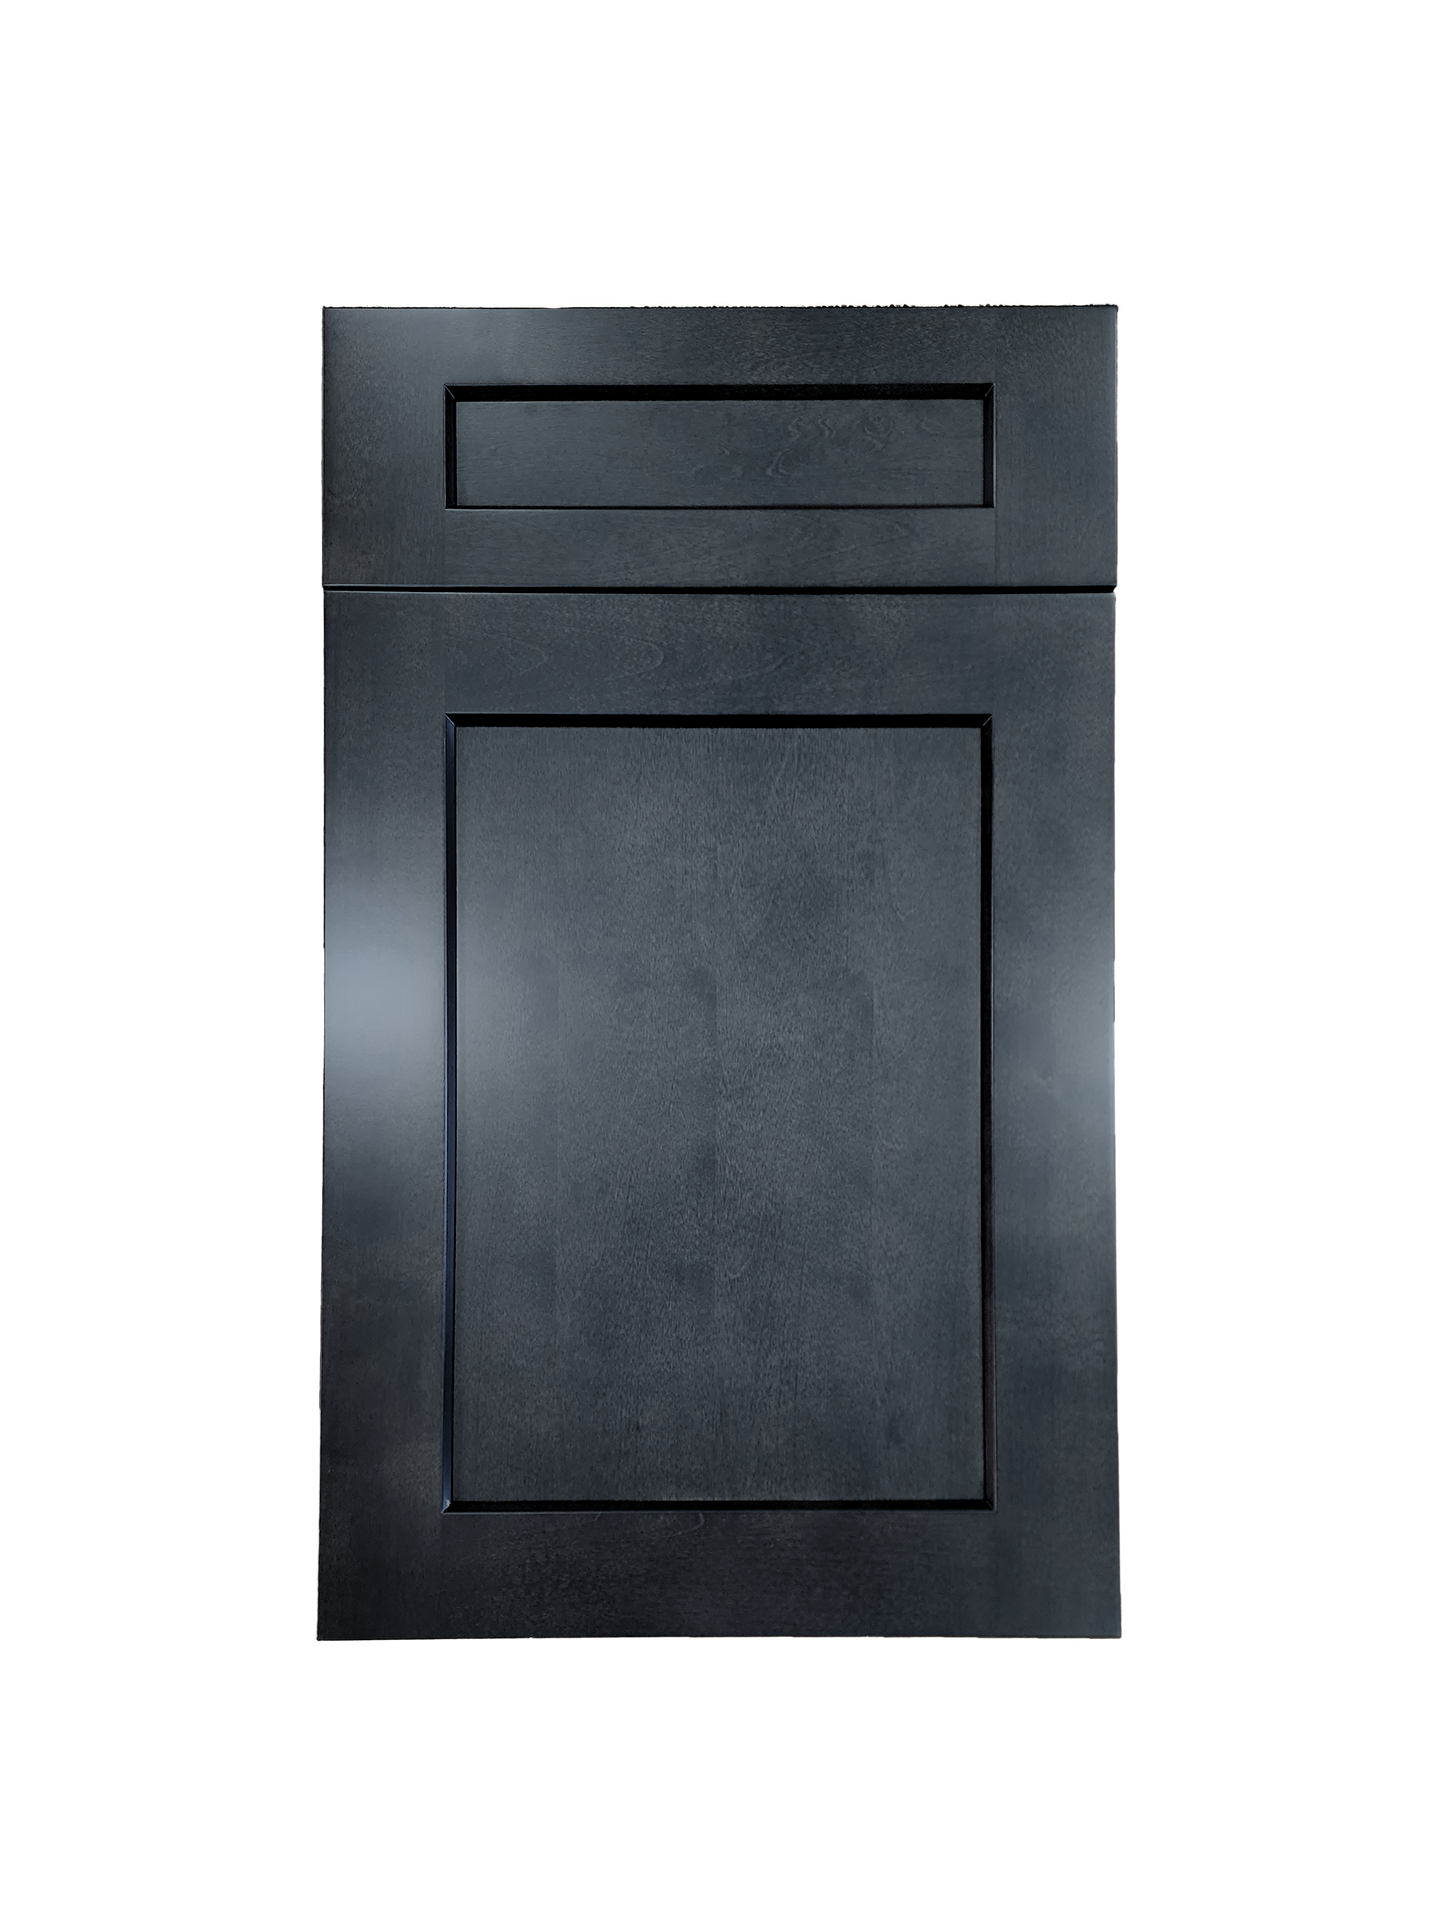 Stormy Grey Wall Cabinet 33 inches wide 12 inches deep 24 inches tall with Stormy Grey box and Stormy Grey doors